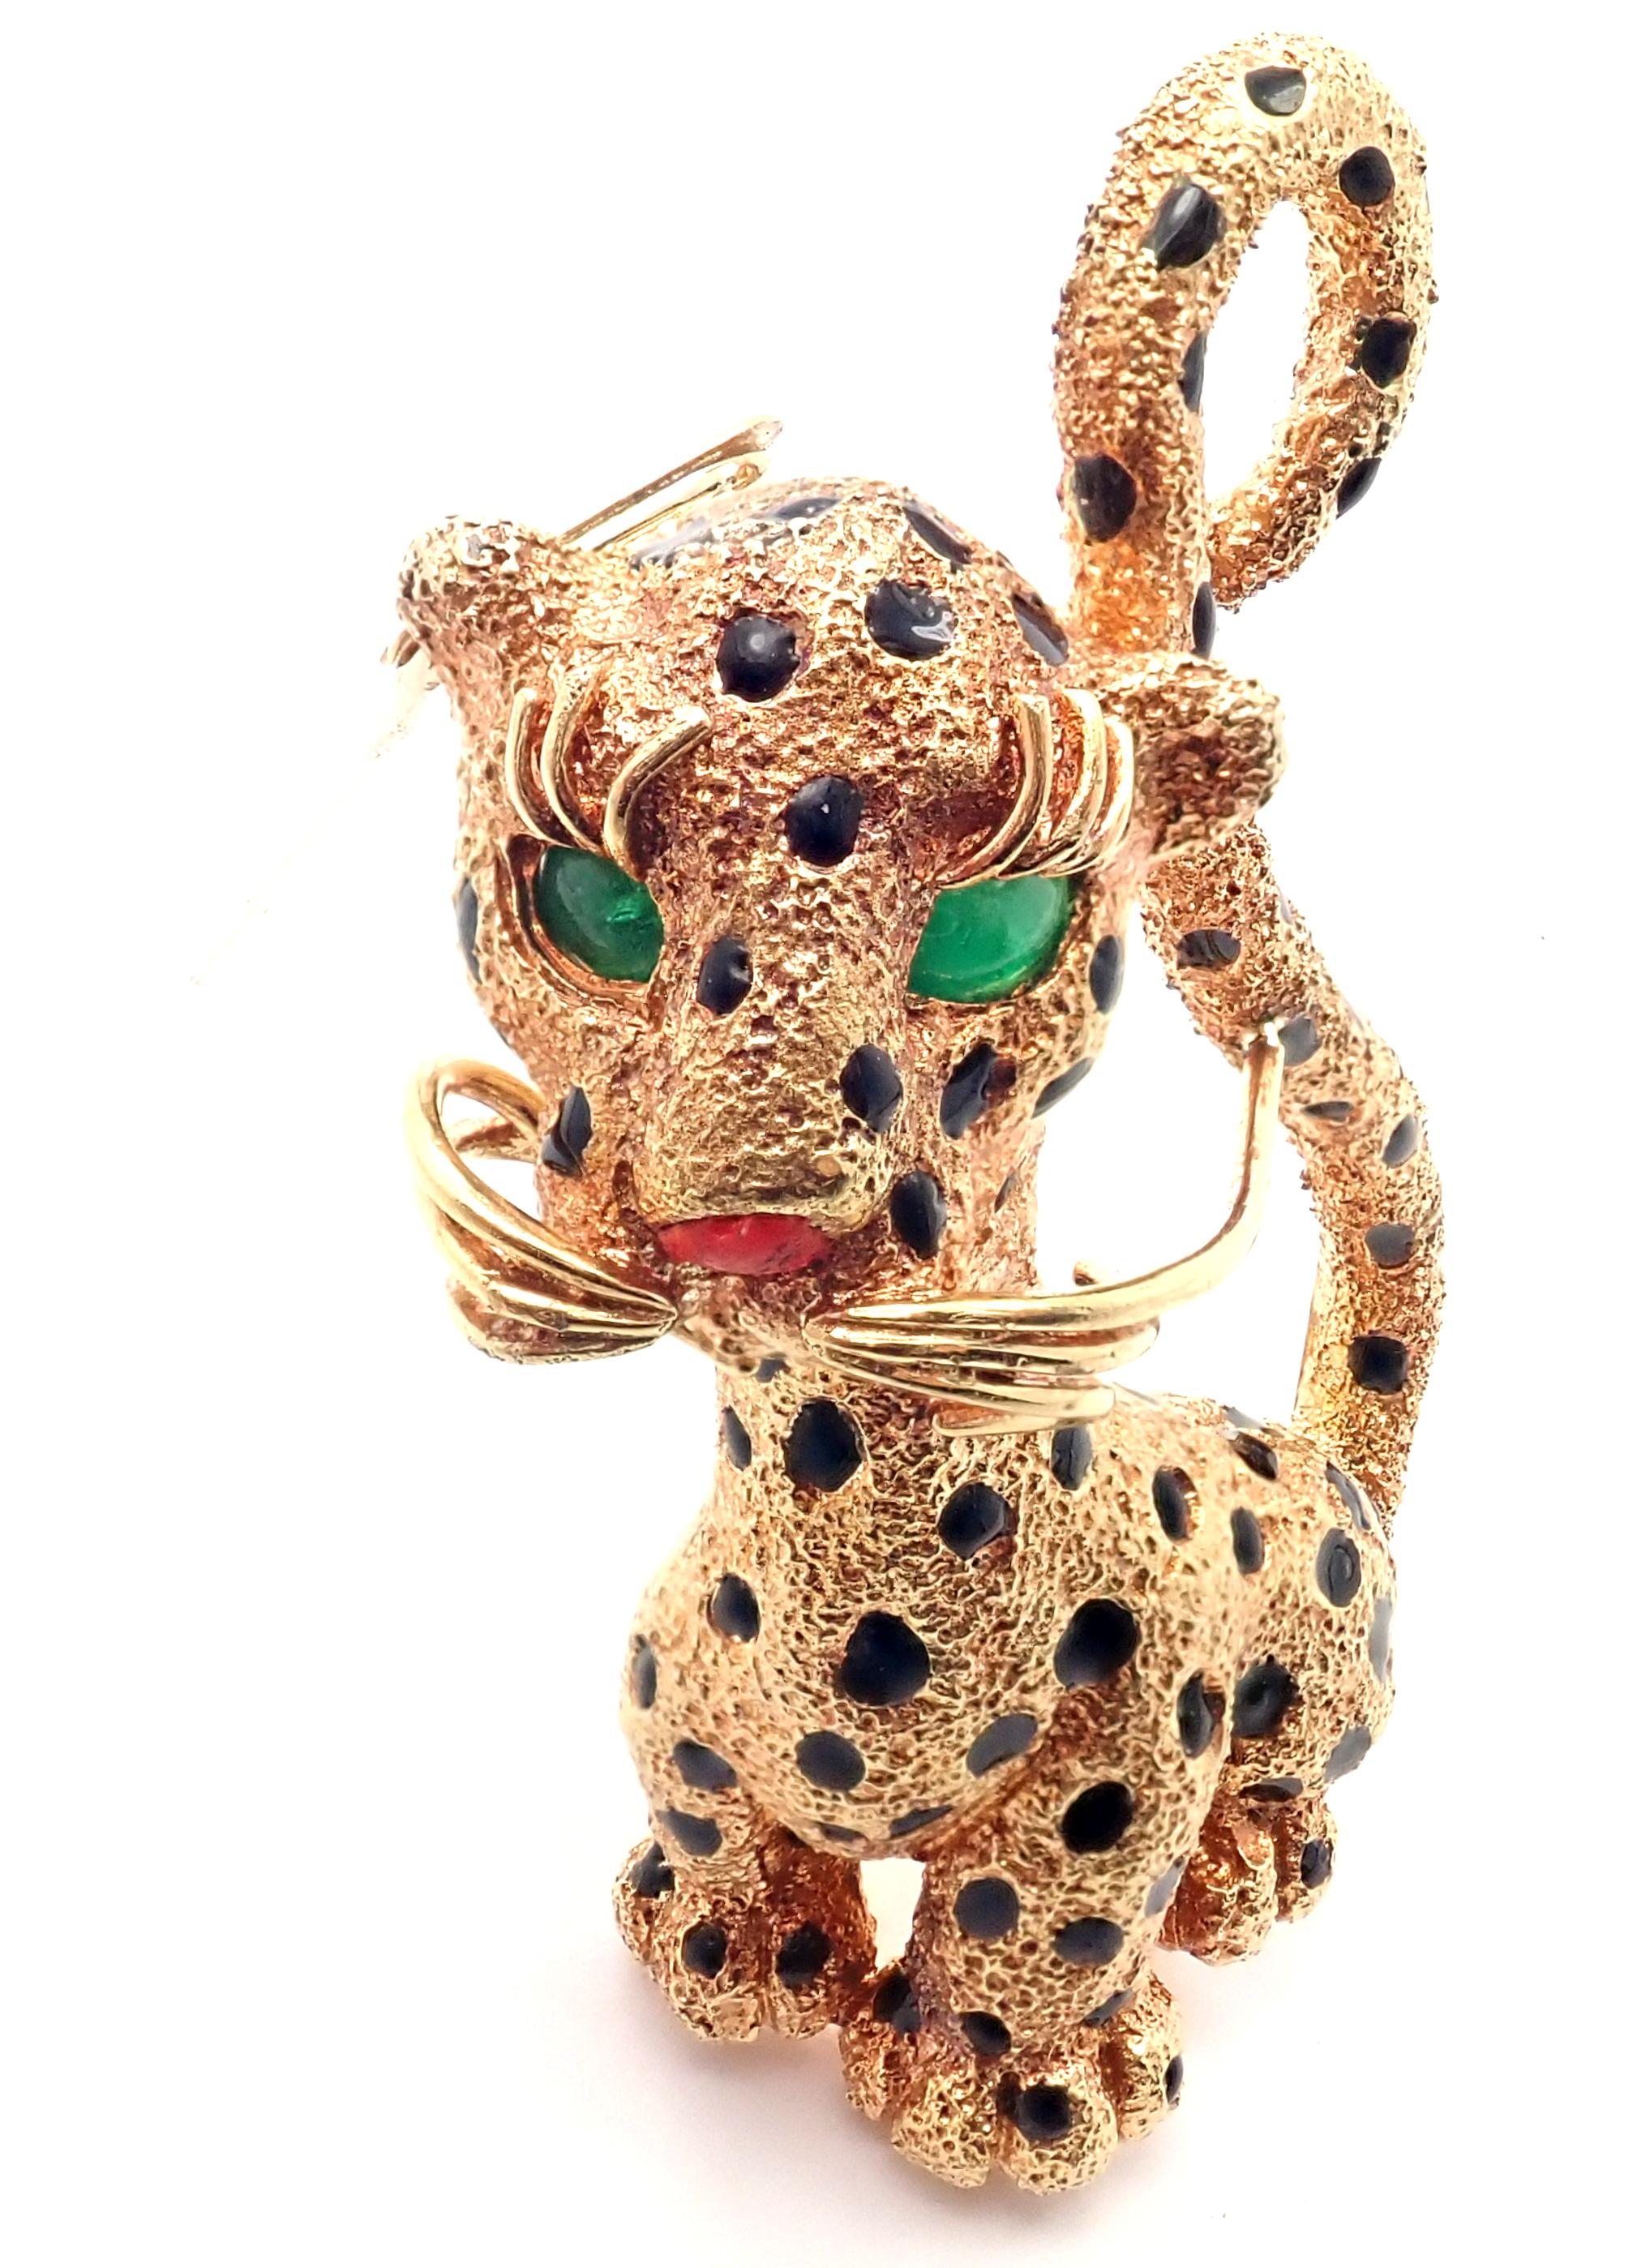 18k Yellow Gold Emerald Enamel Leopard Brooch Pin by Van Cleef & Arpels. 
With 2 emeralds in the eyes total weight approximately .79ct
Details: 
Weight: 19.3 grams
Measurements: 51mm x 26mm
Stamped Hallmarks: VCA 73 128437 18k 0.79ct
*Free Shipping